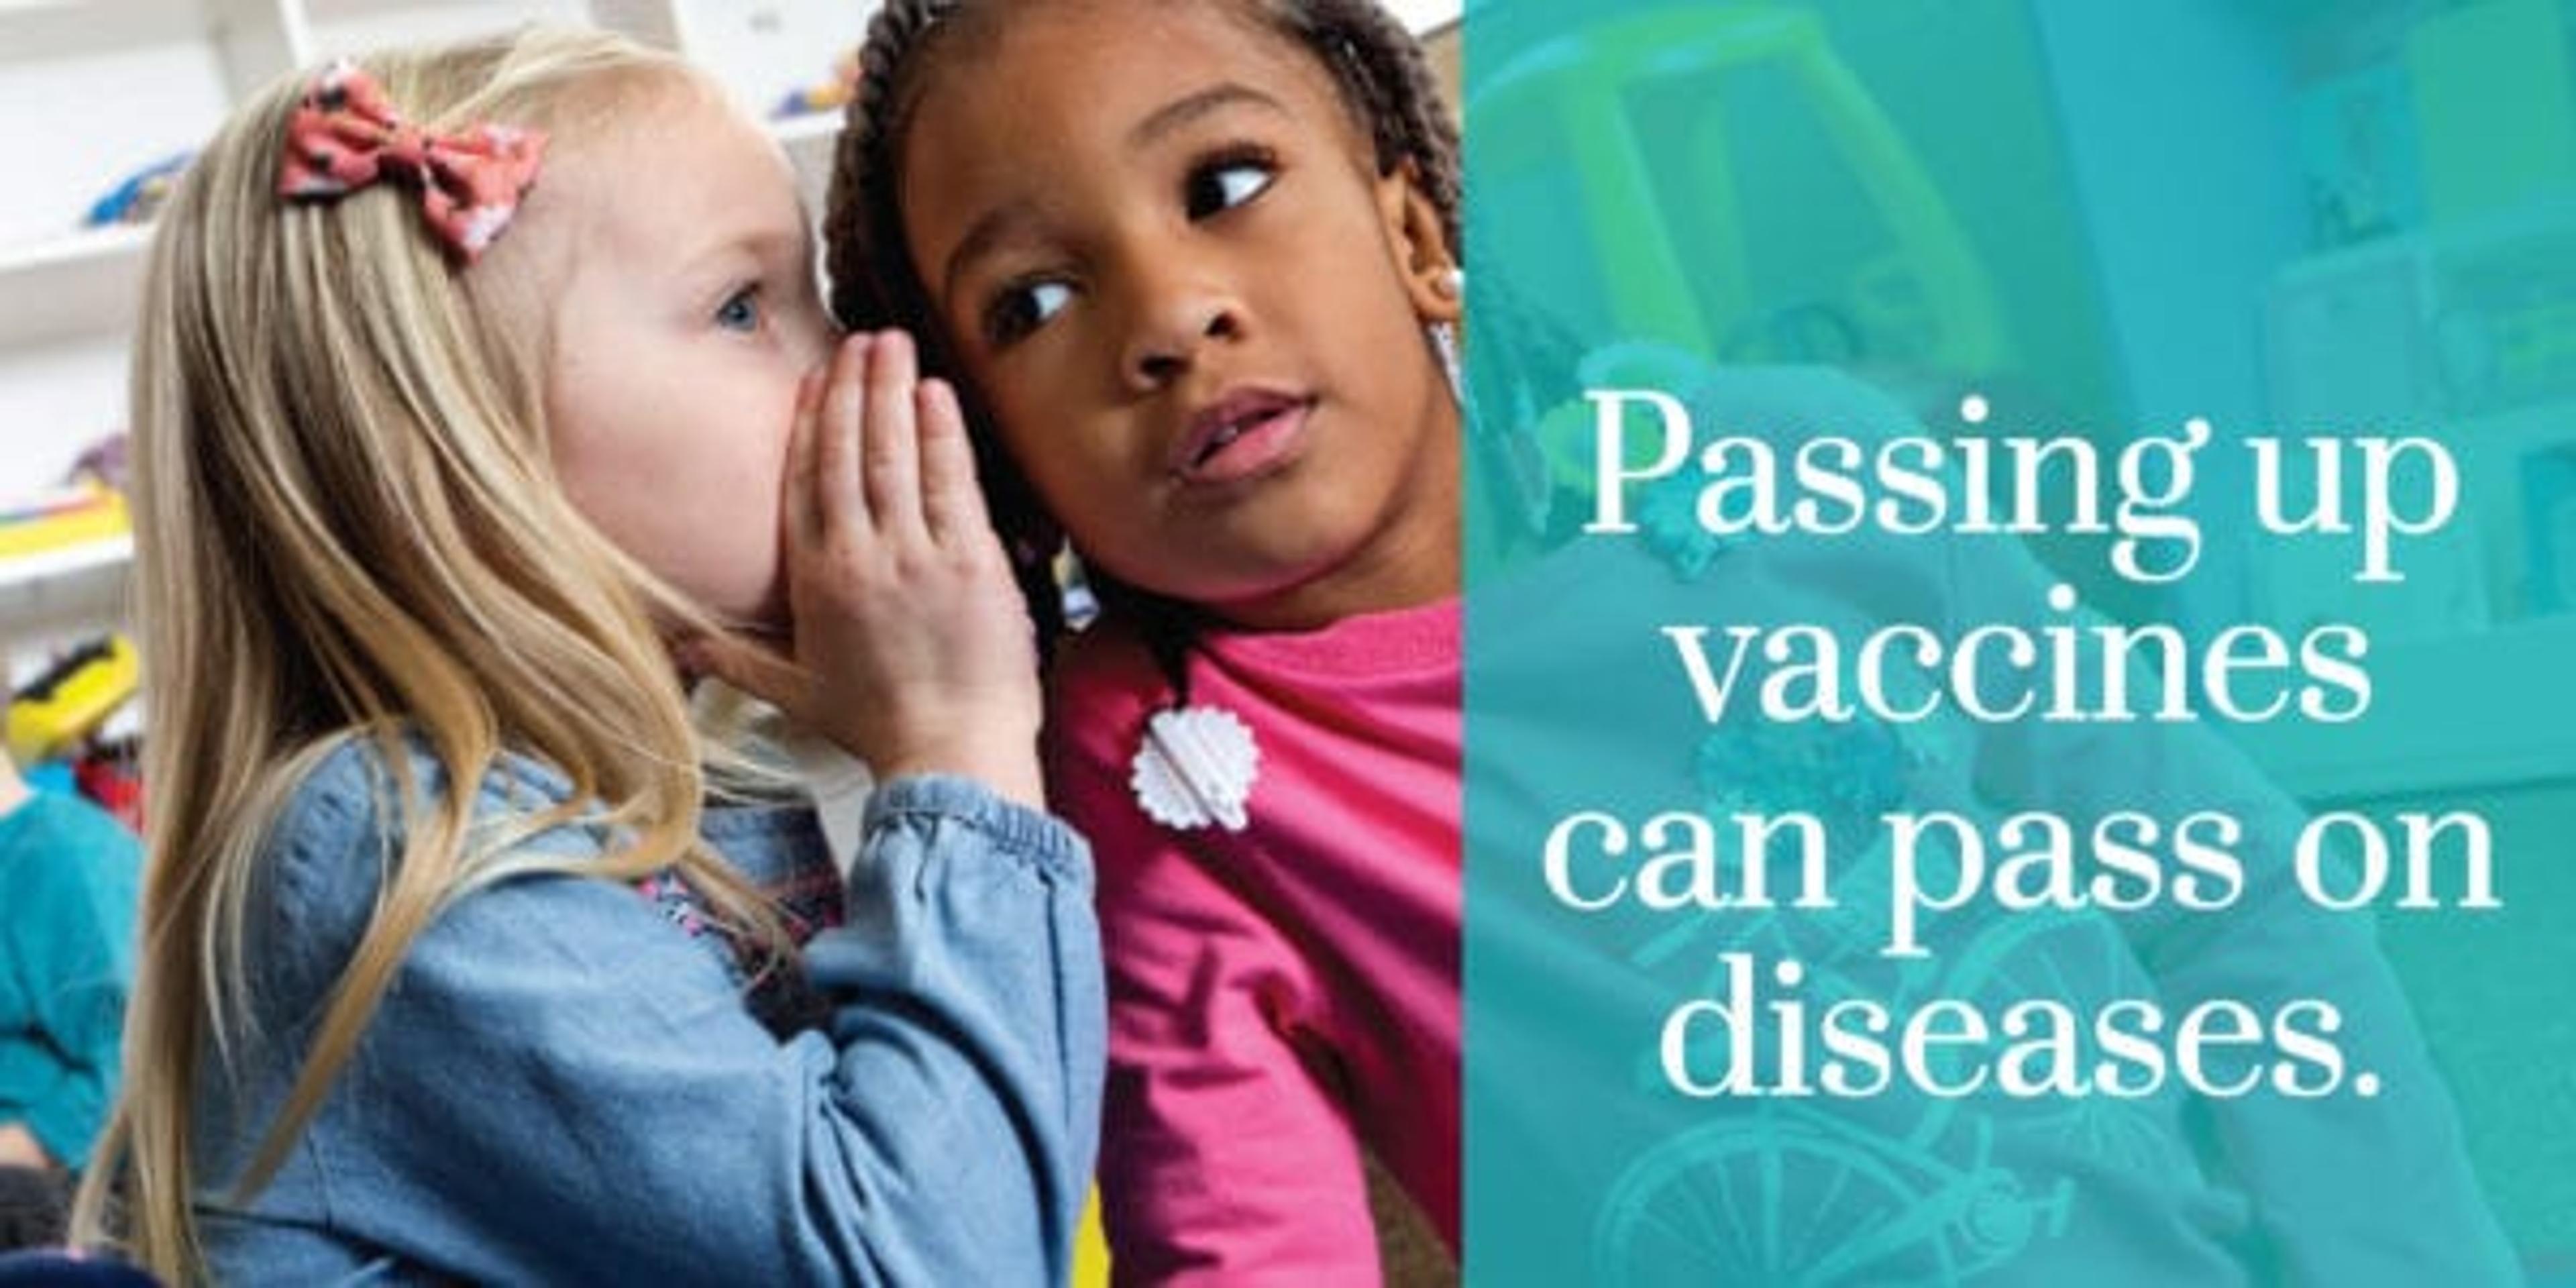 Passing up vaccines can pass on diseases